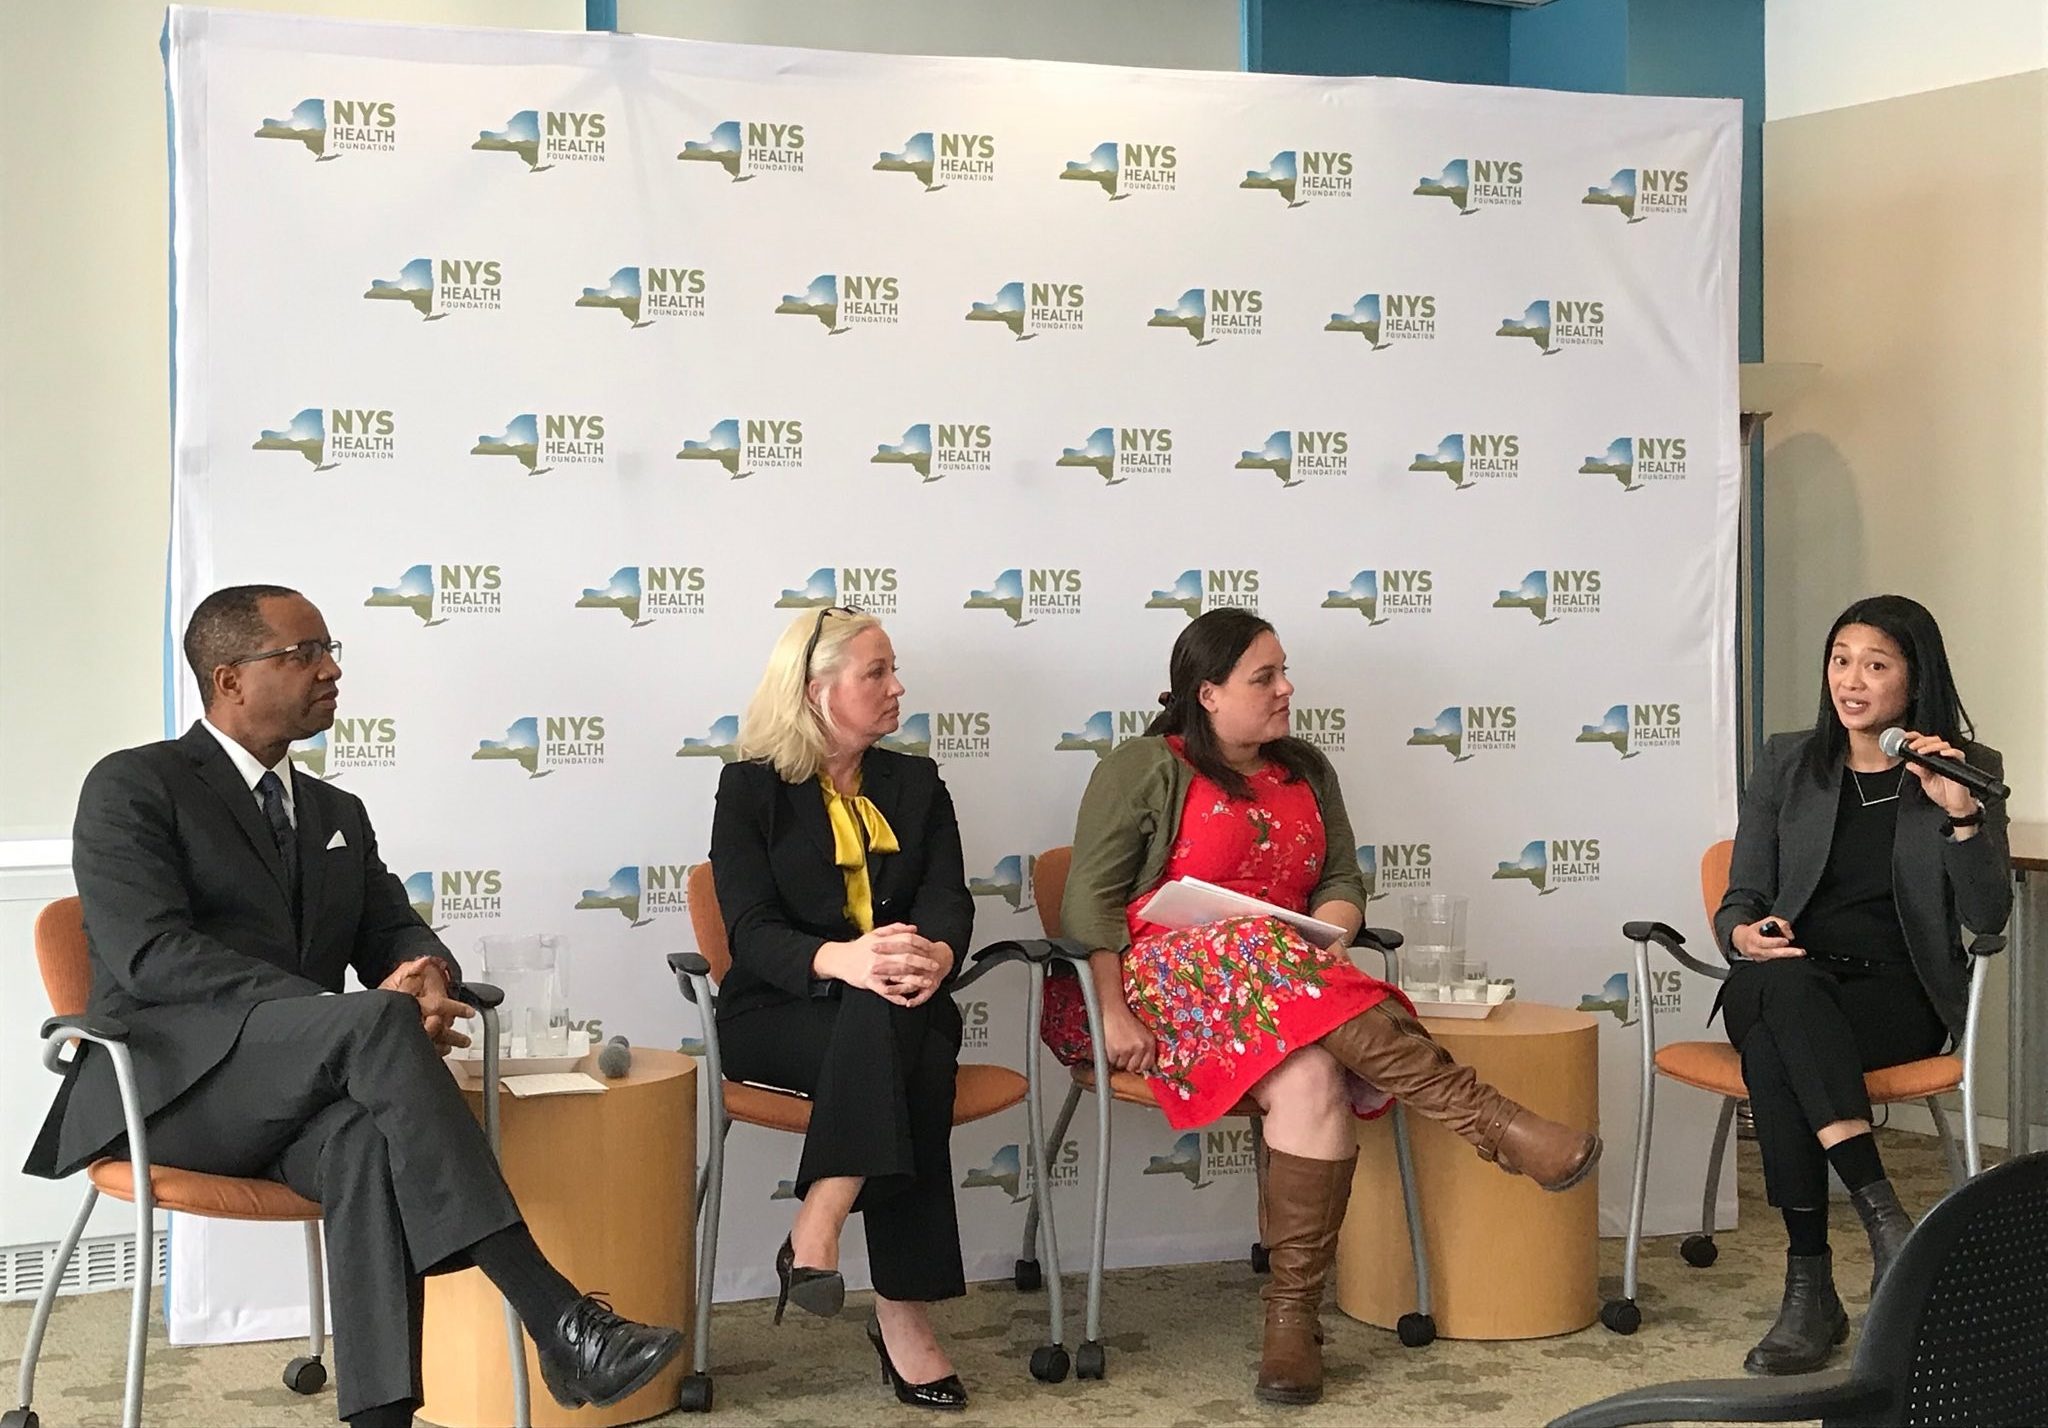 NYHealth Senior Program Officer Brian Byrd moderates a panel on social needs in health care with Elizabeth Misa, Carla K. Nelson, and Theresa Soriano.